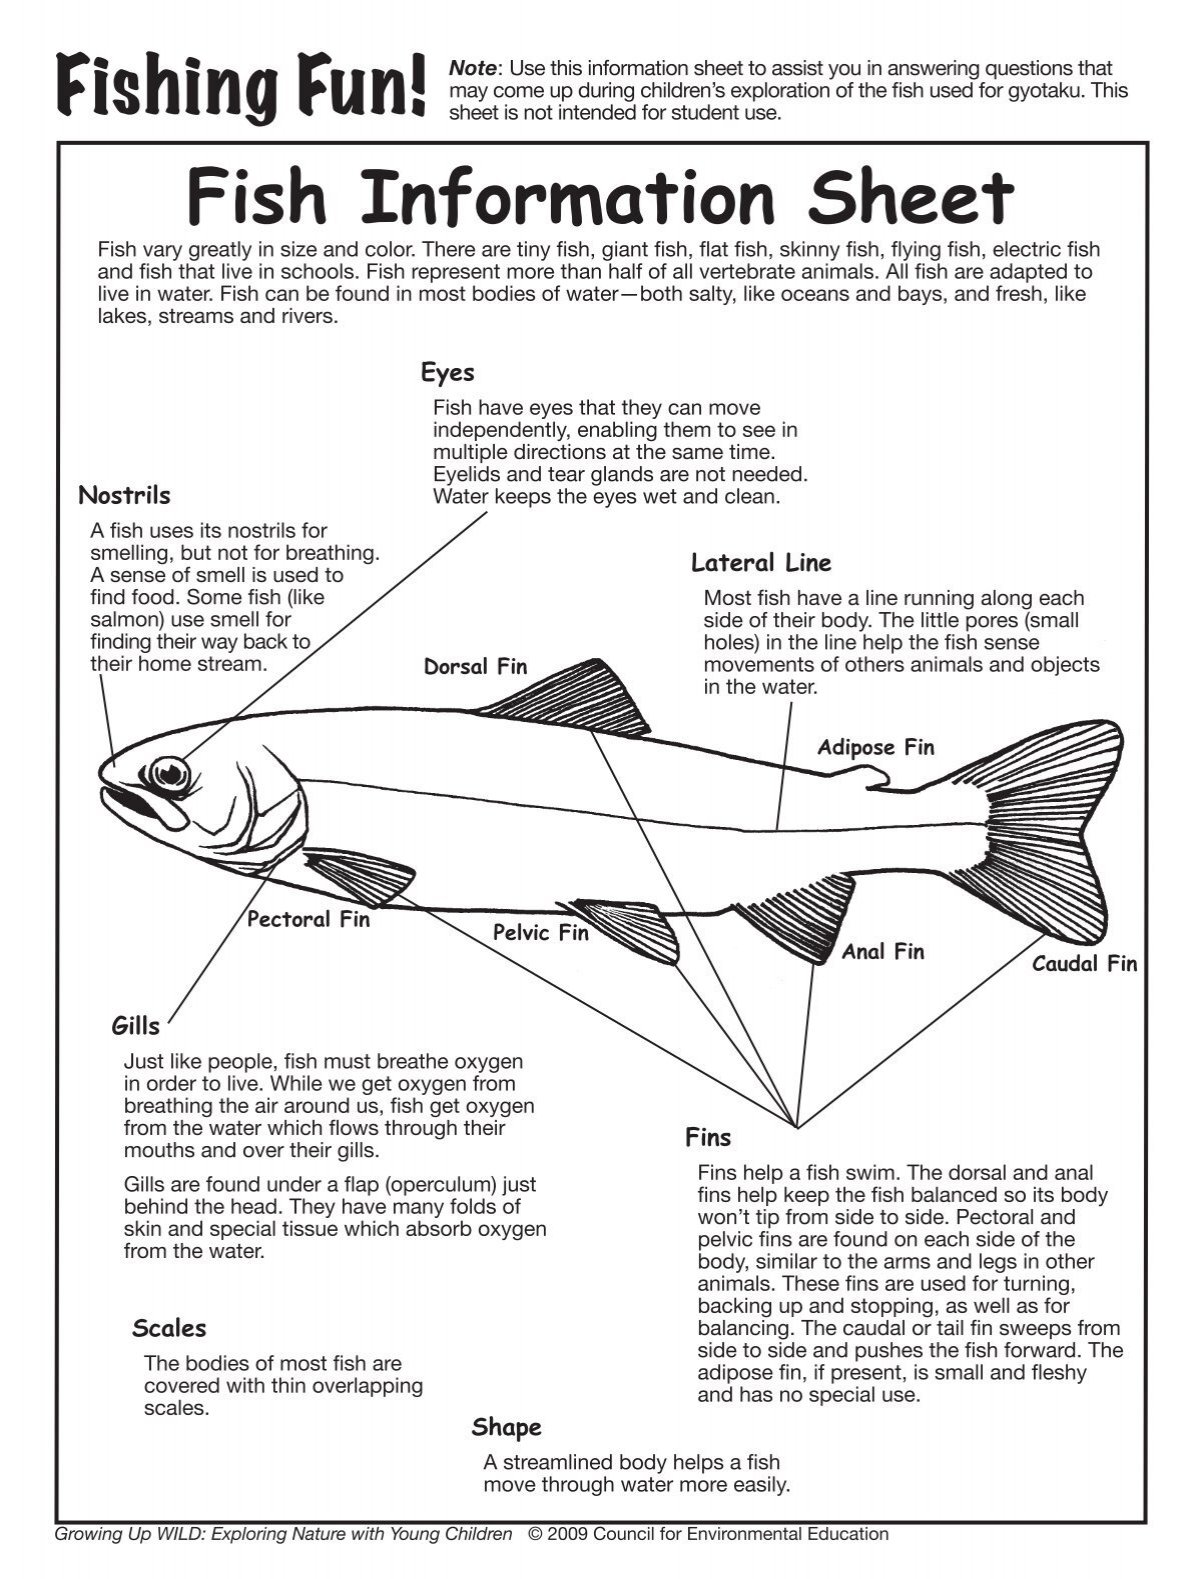 Basics on How To Fish with Detailed Information